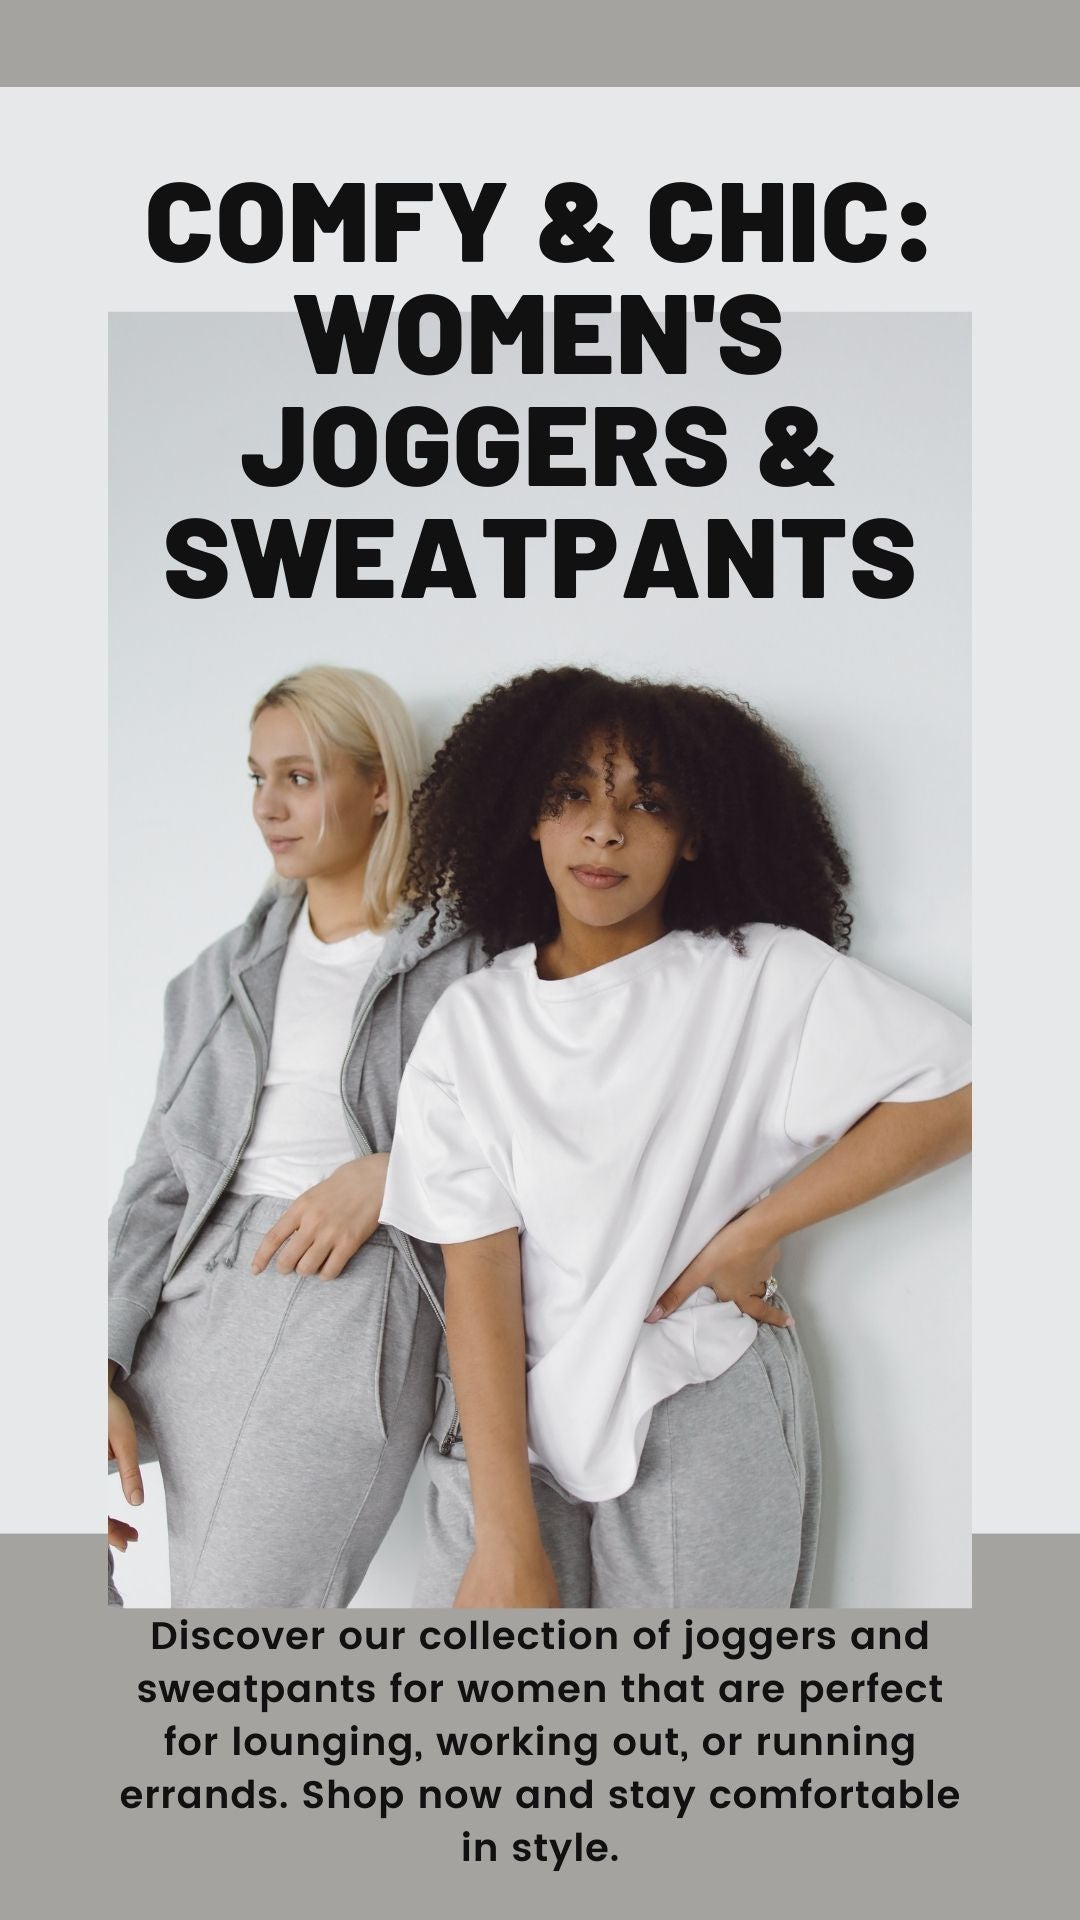 "Shop Stylish Women's Joggers & Sweatpants Collection | Trendy Activewear for Every Workout